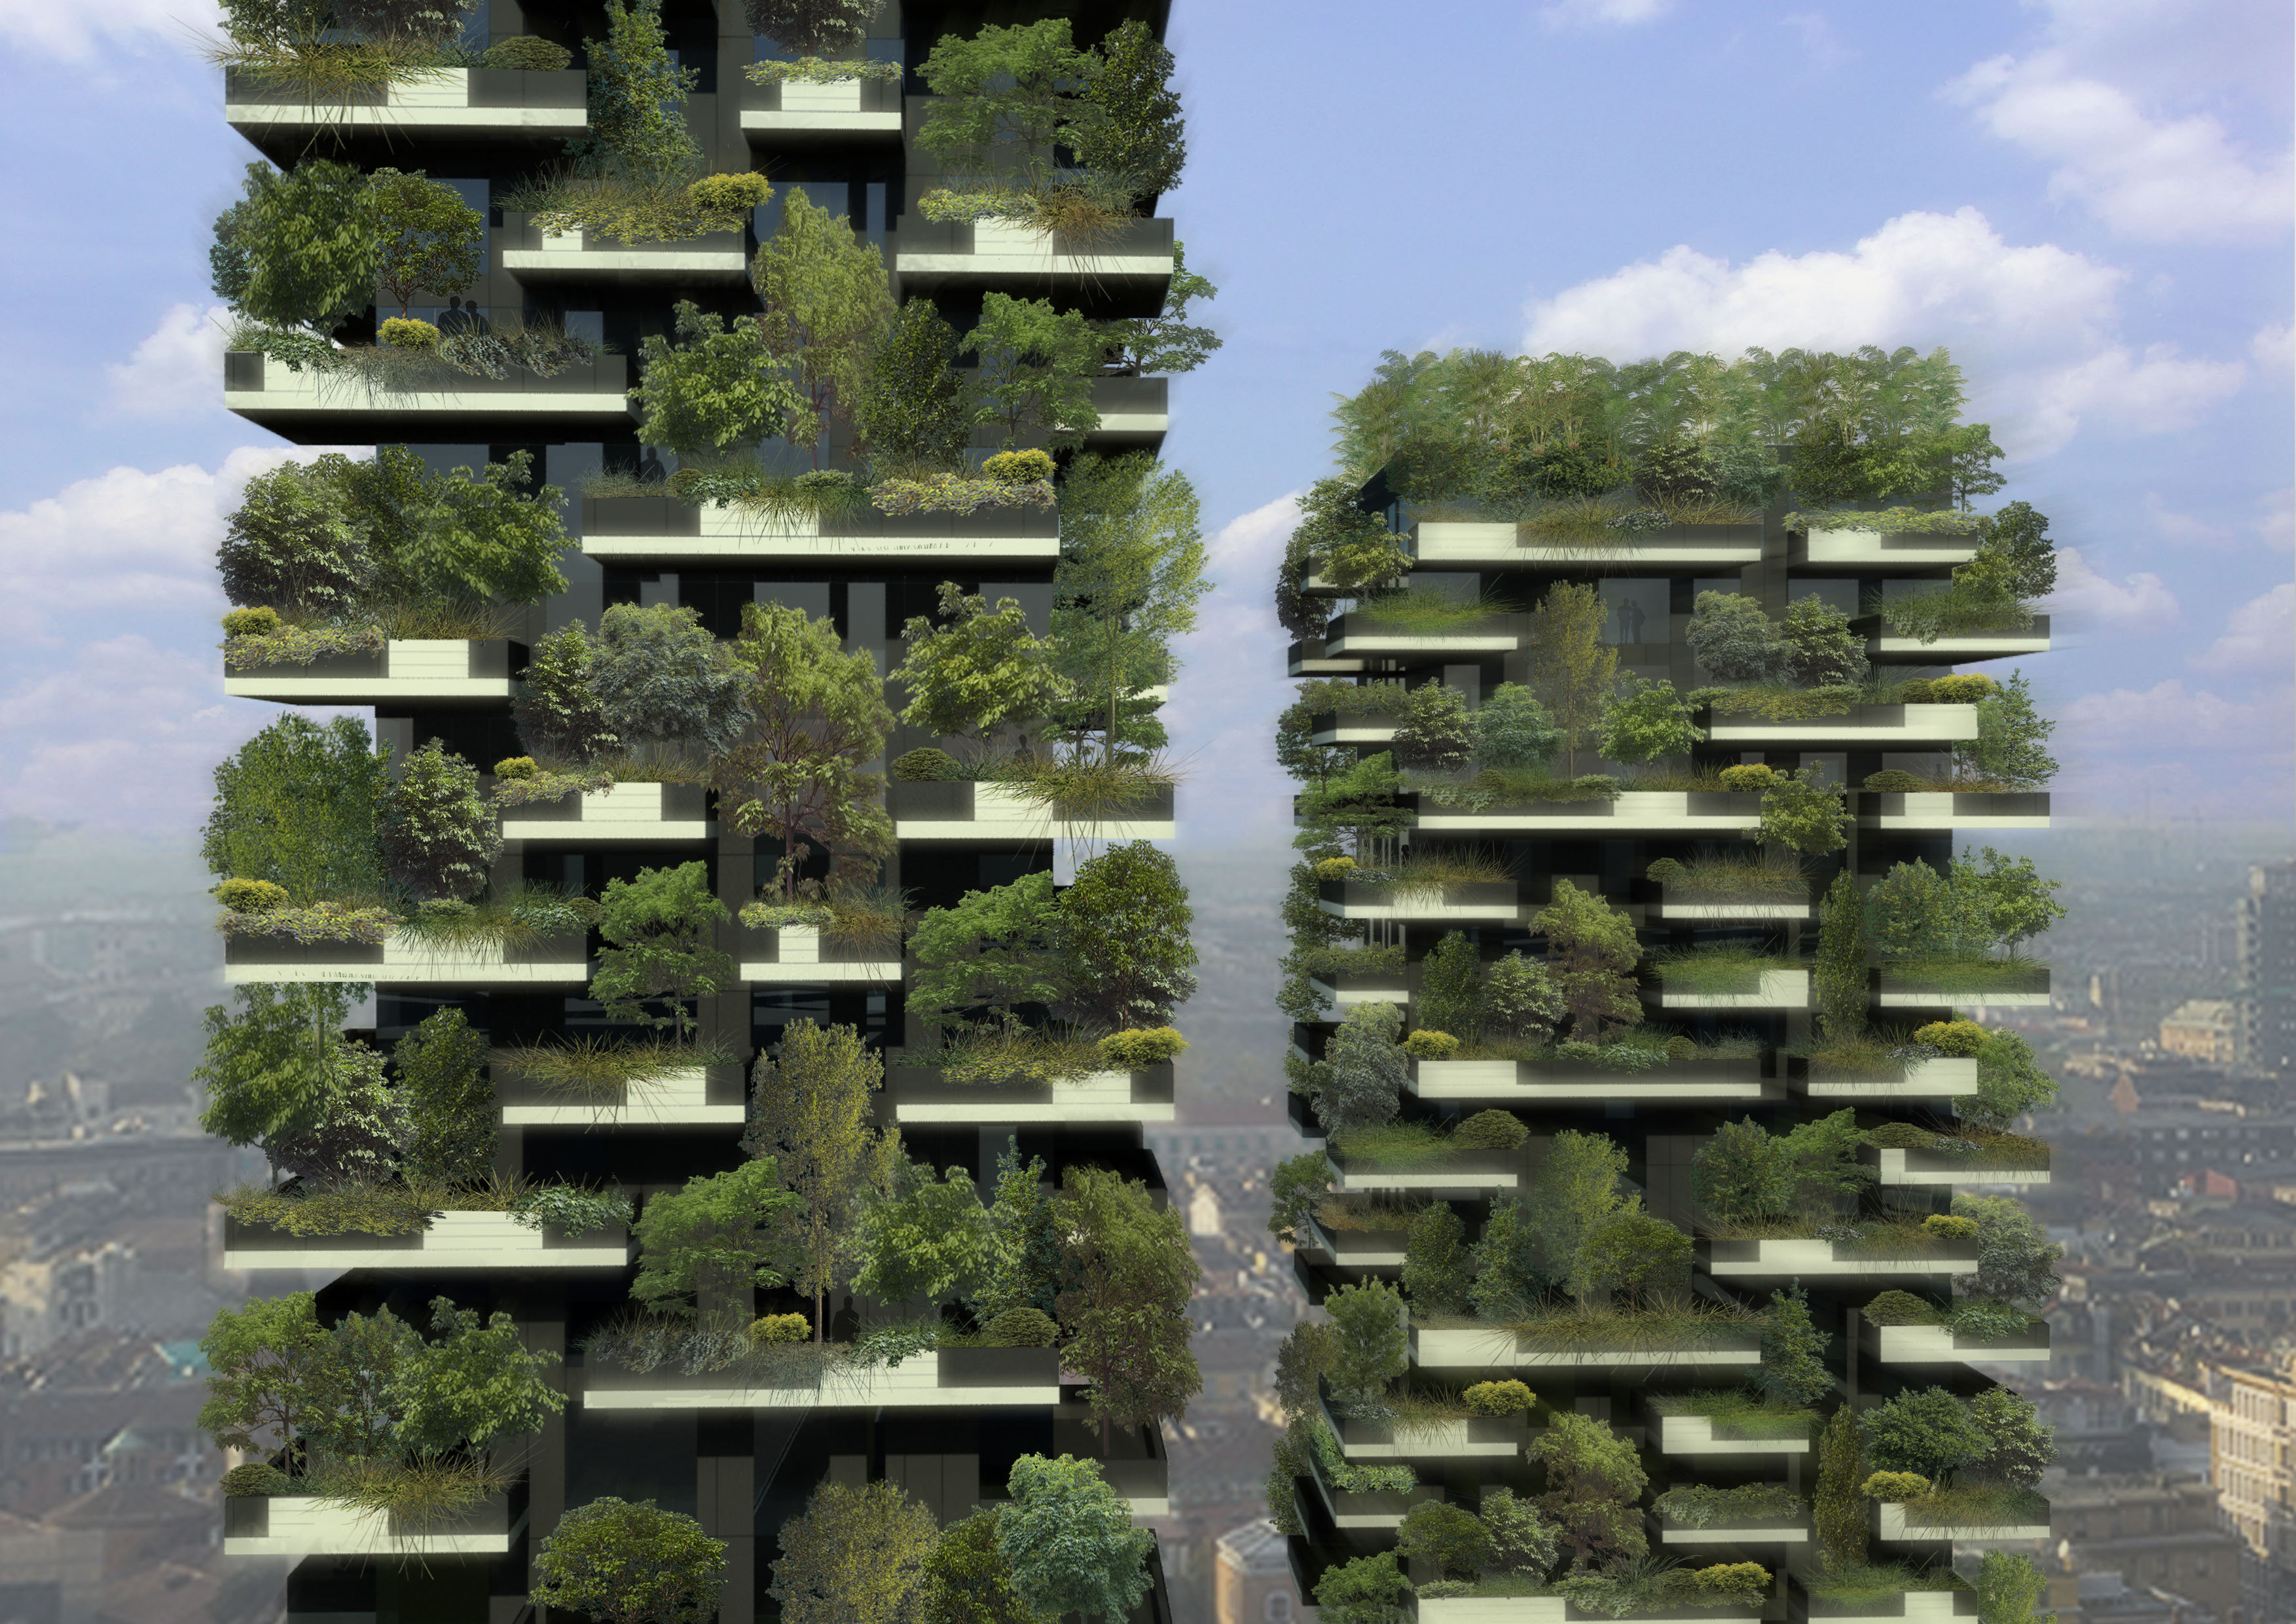 A vertical forest is developing on two skyscrapers in Milan, IT